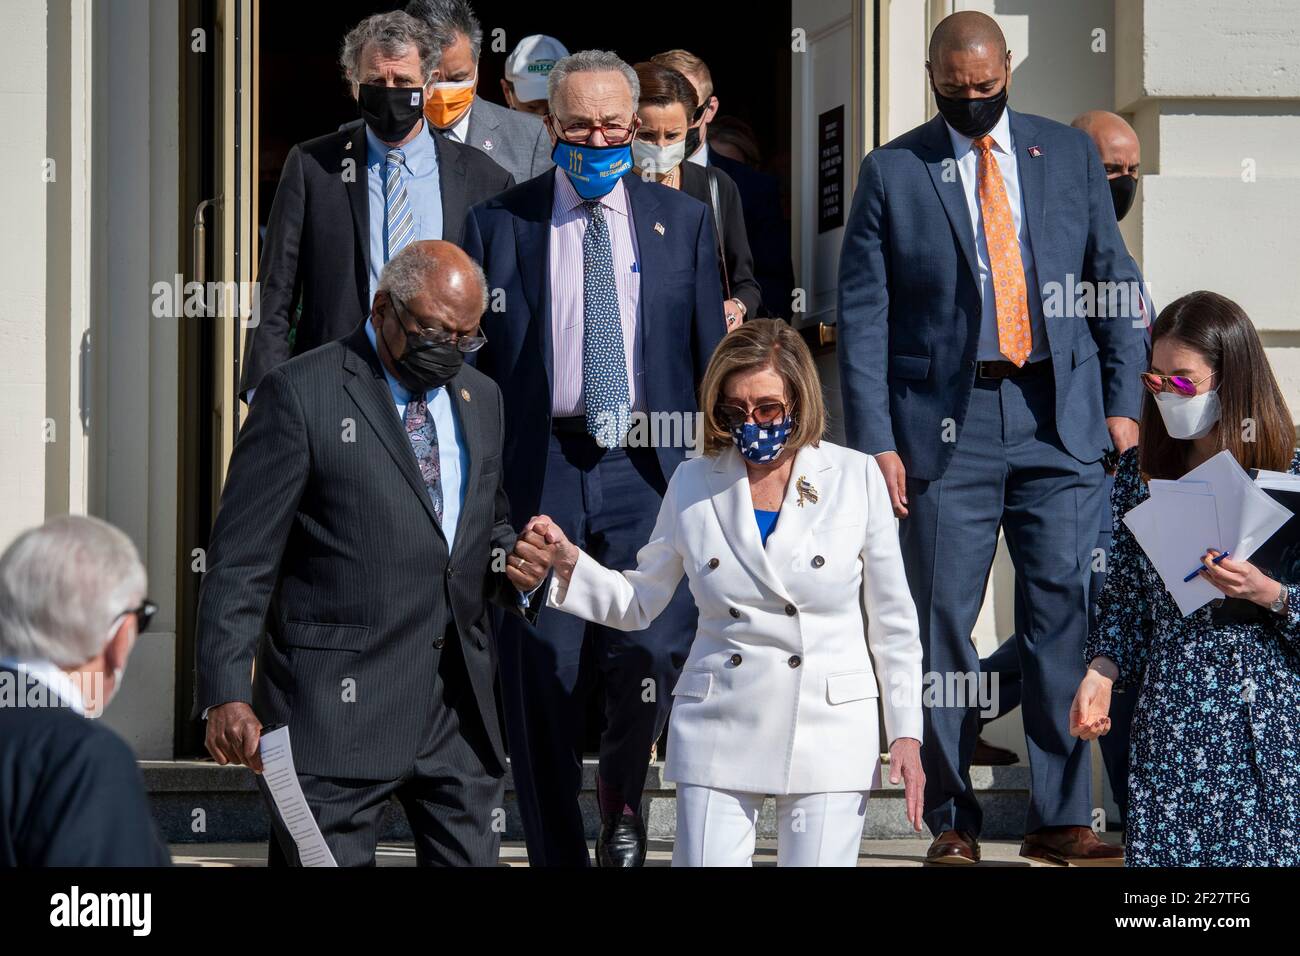 Washington, United States Of America. 10th Mar, 2021. Speaker of the United States House of Representatives Nancy Pelosi (Democrat of California), right, walks with United States House Majority Whip James Clyburn (Democrat of South Carolina), left, down the steps prior to the signing of the American Rescue Plan Act of 2021 on the West Terrace of the U.S. Capitol in Washington, DC, Wednesday, March 10, 2021. Credit: Rod Lamkey/CNP | usage worldwide Credit: dpa/Alamy Live News Stock Photo